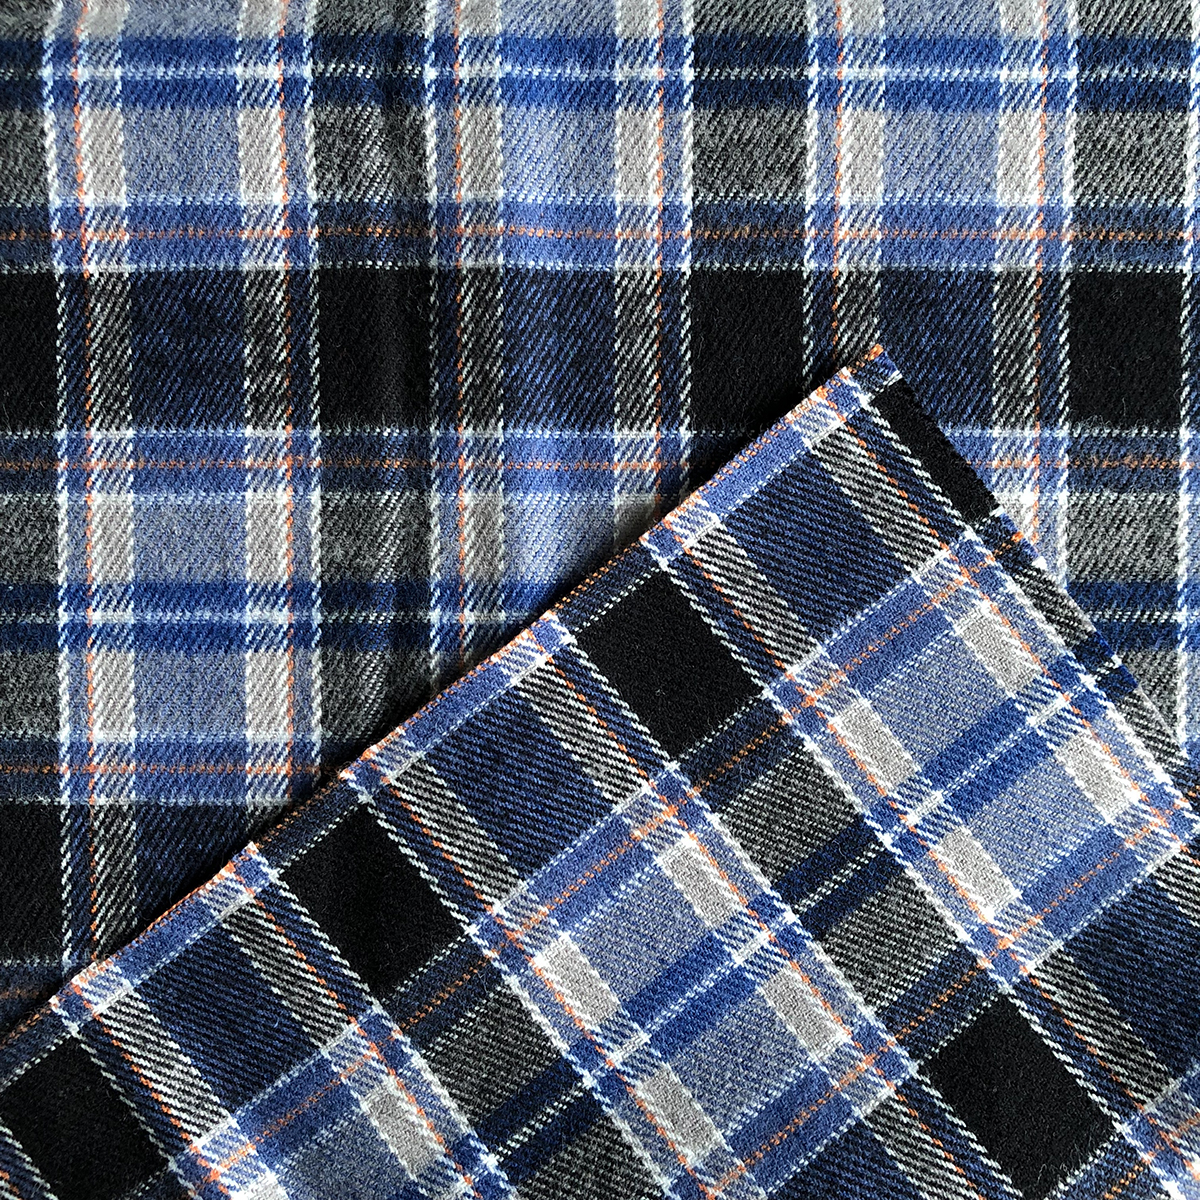 Cotton Flannel Fabric for men's casual shirts by twisted yarn 100% cotton yarn dyed twill plaid brushed shirts woven fabric